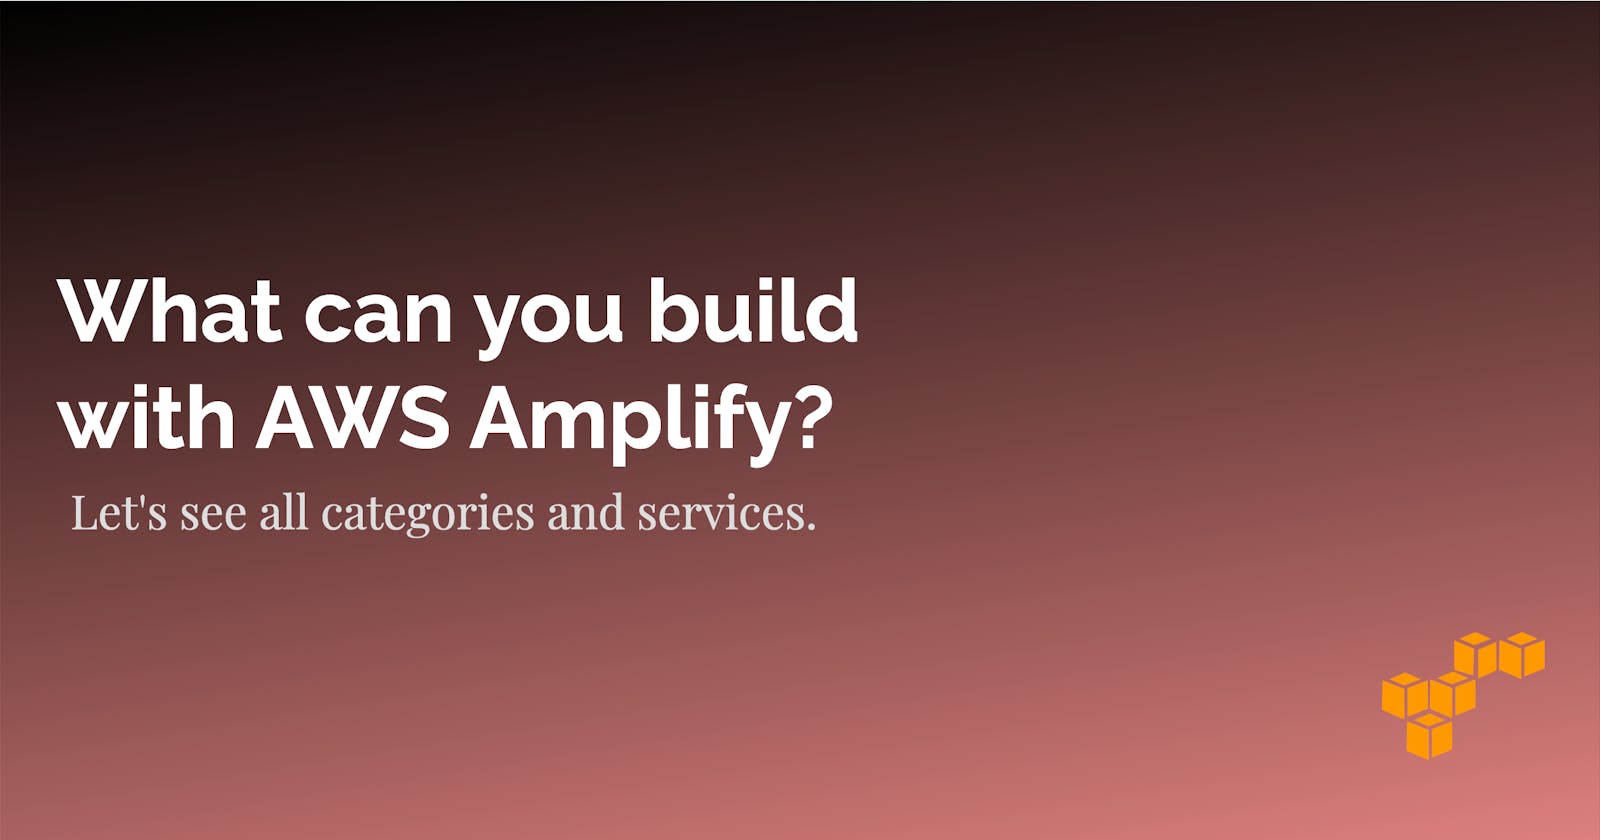 What can you build with AWS Amplify? Let's see all categories and services.